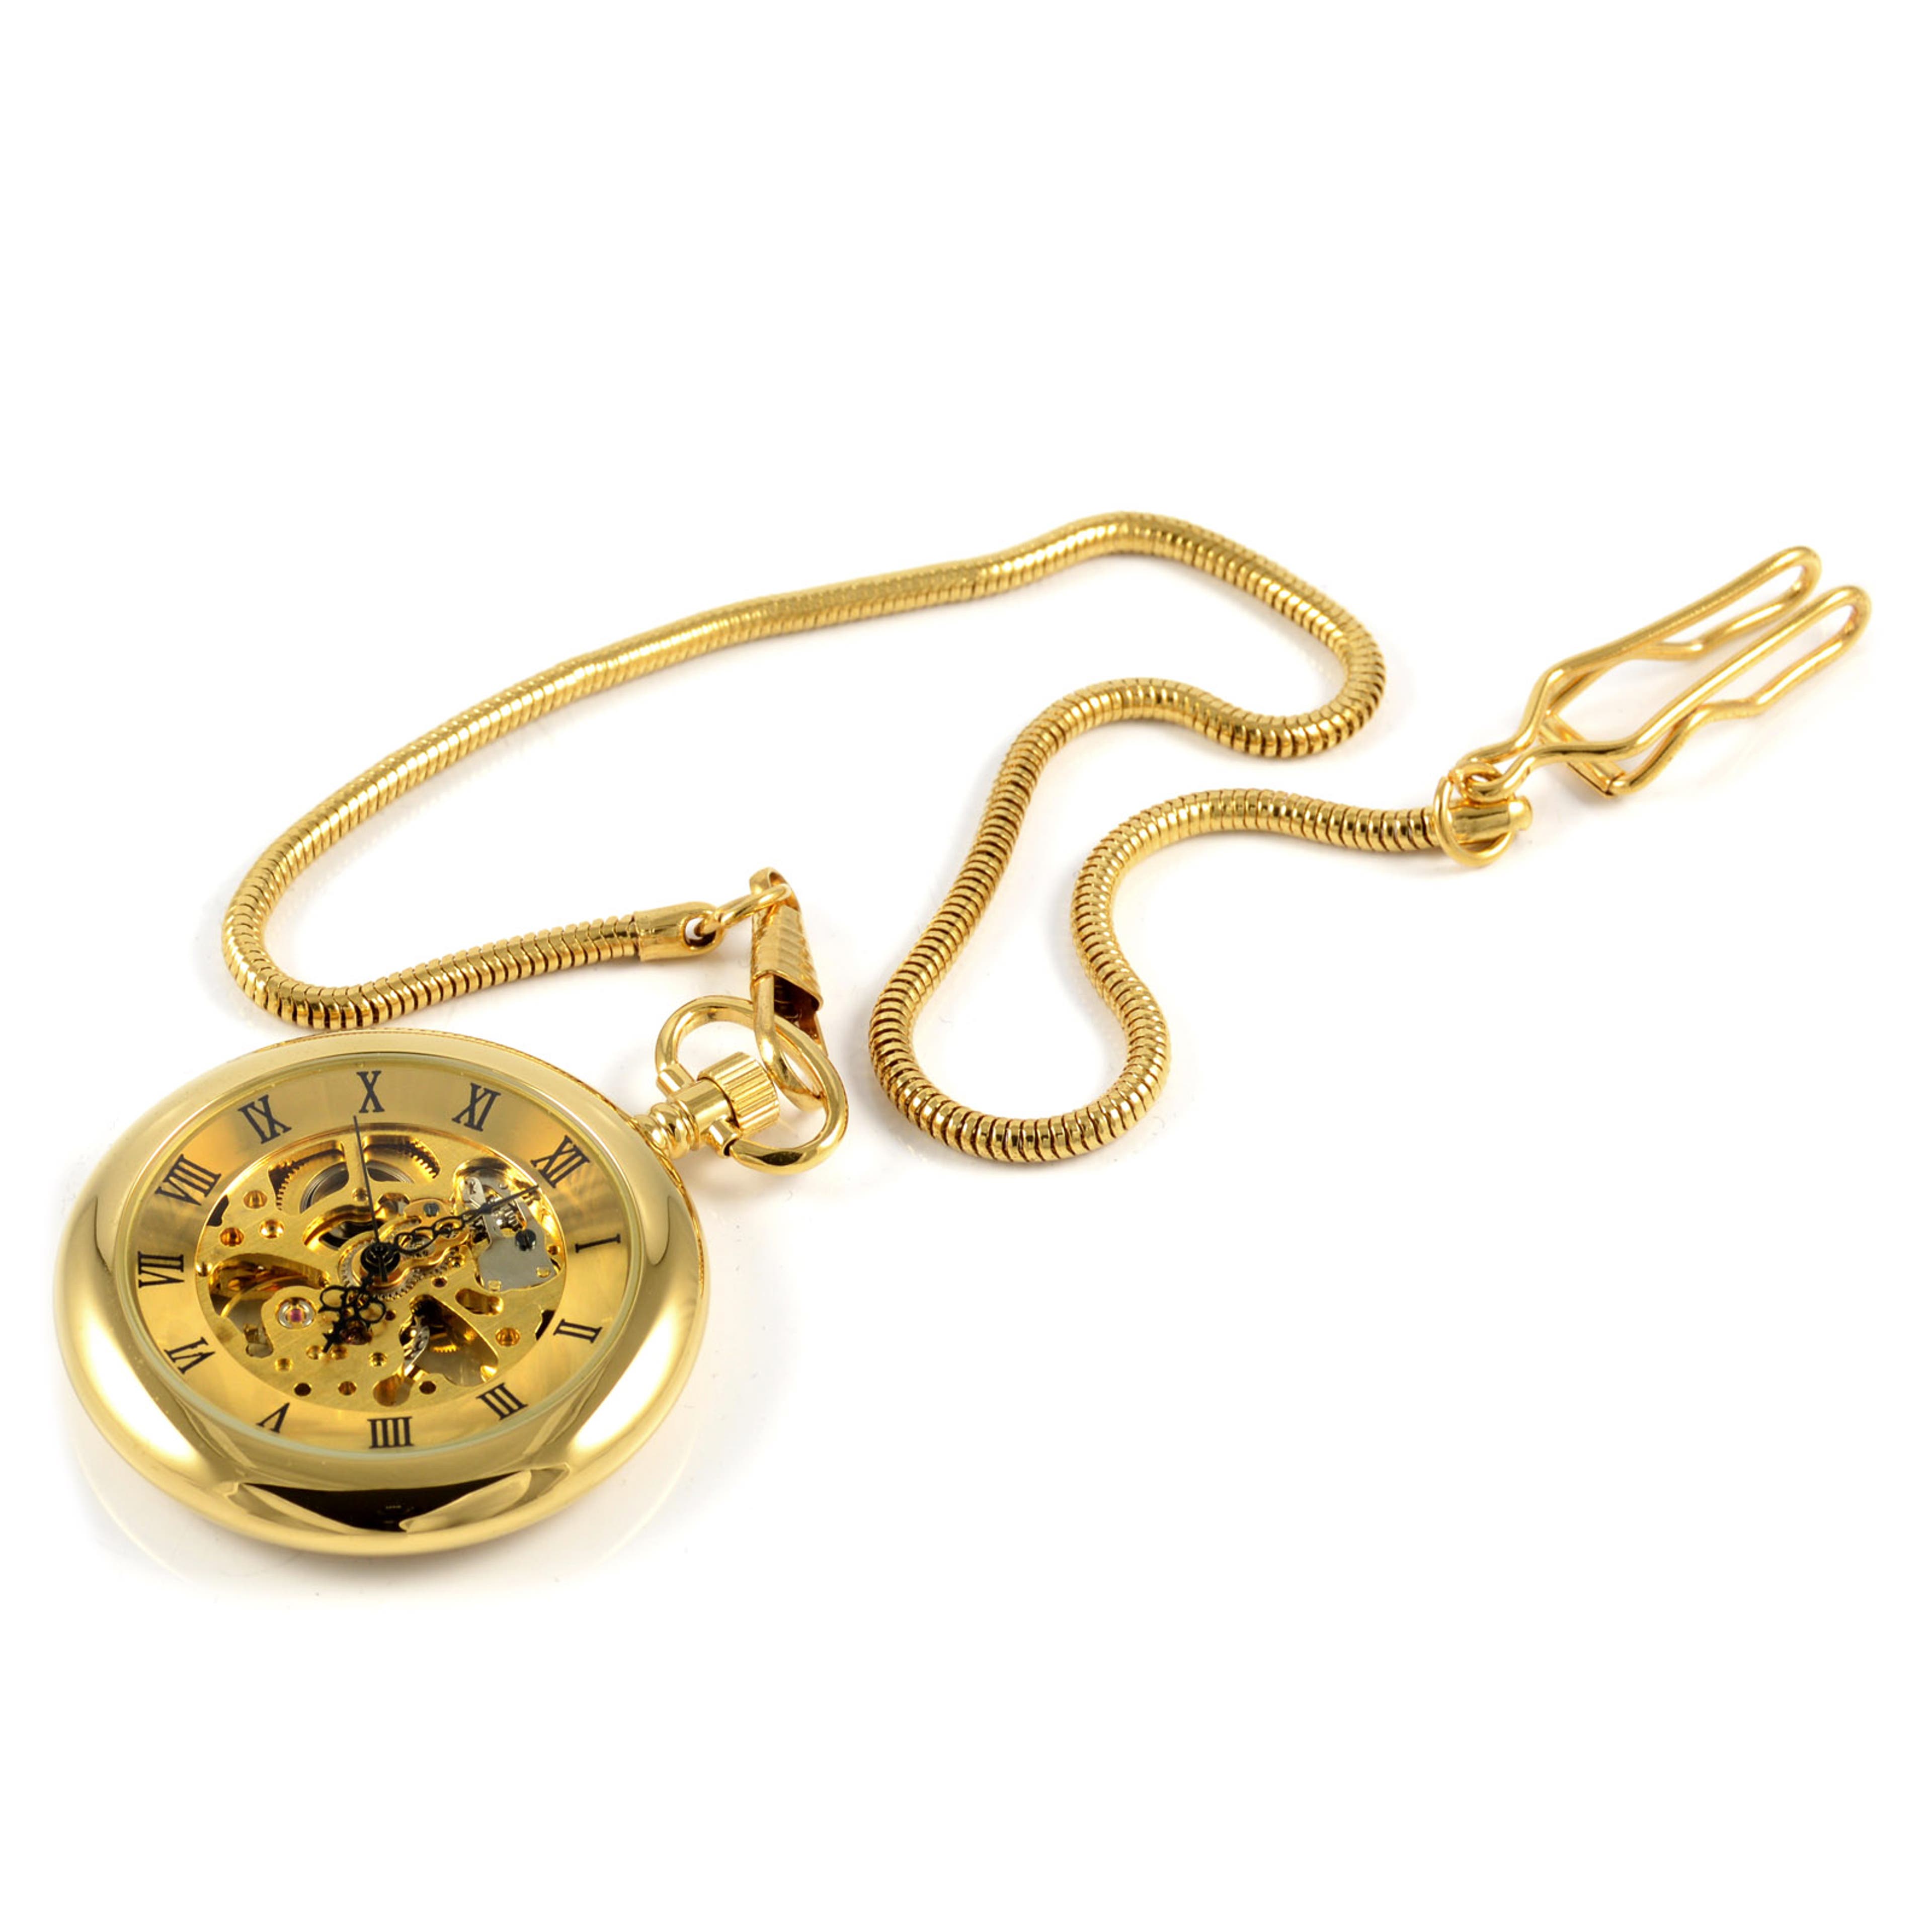 Gold-Tone Mechanical Pocket Watch With Gold-Tone Movement & Gold-Tone Snake Chain